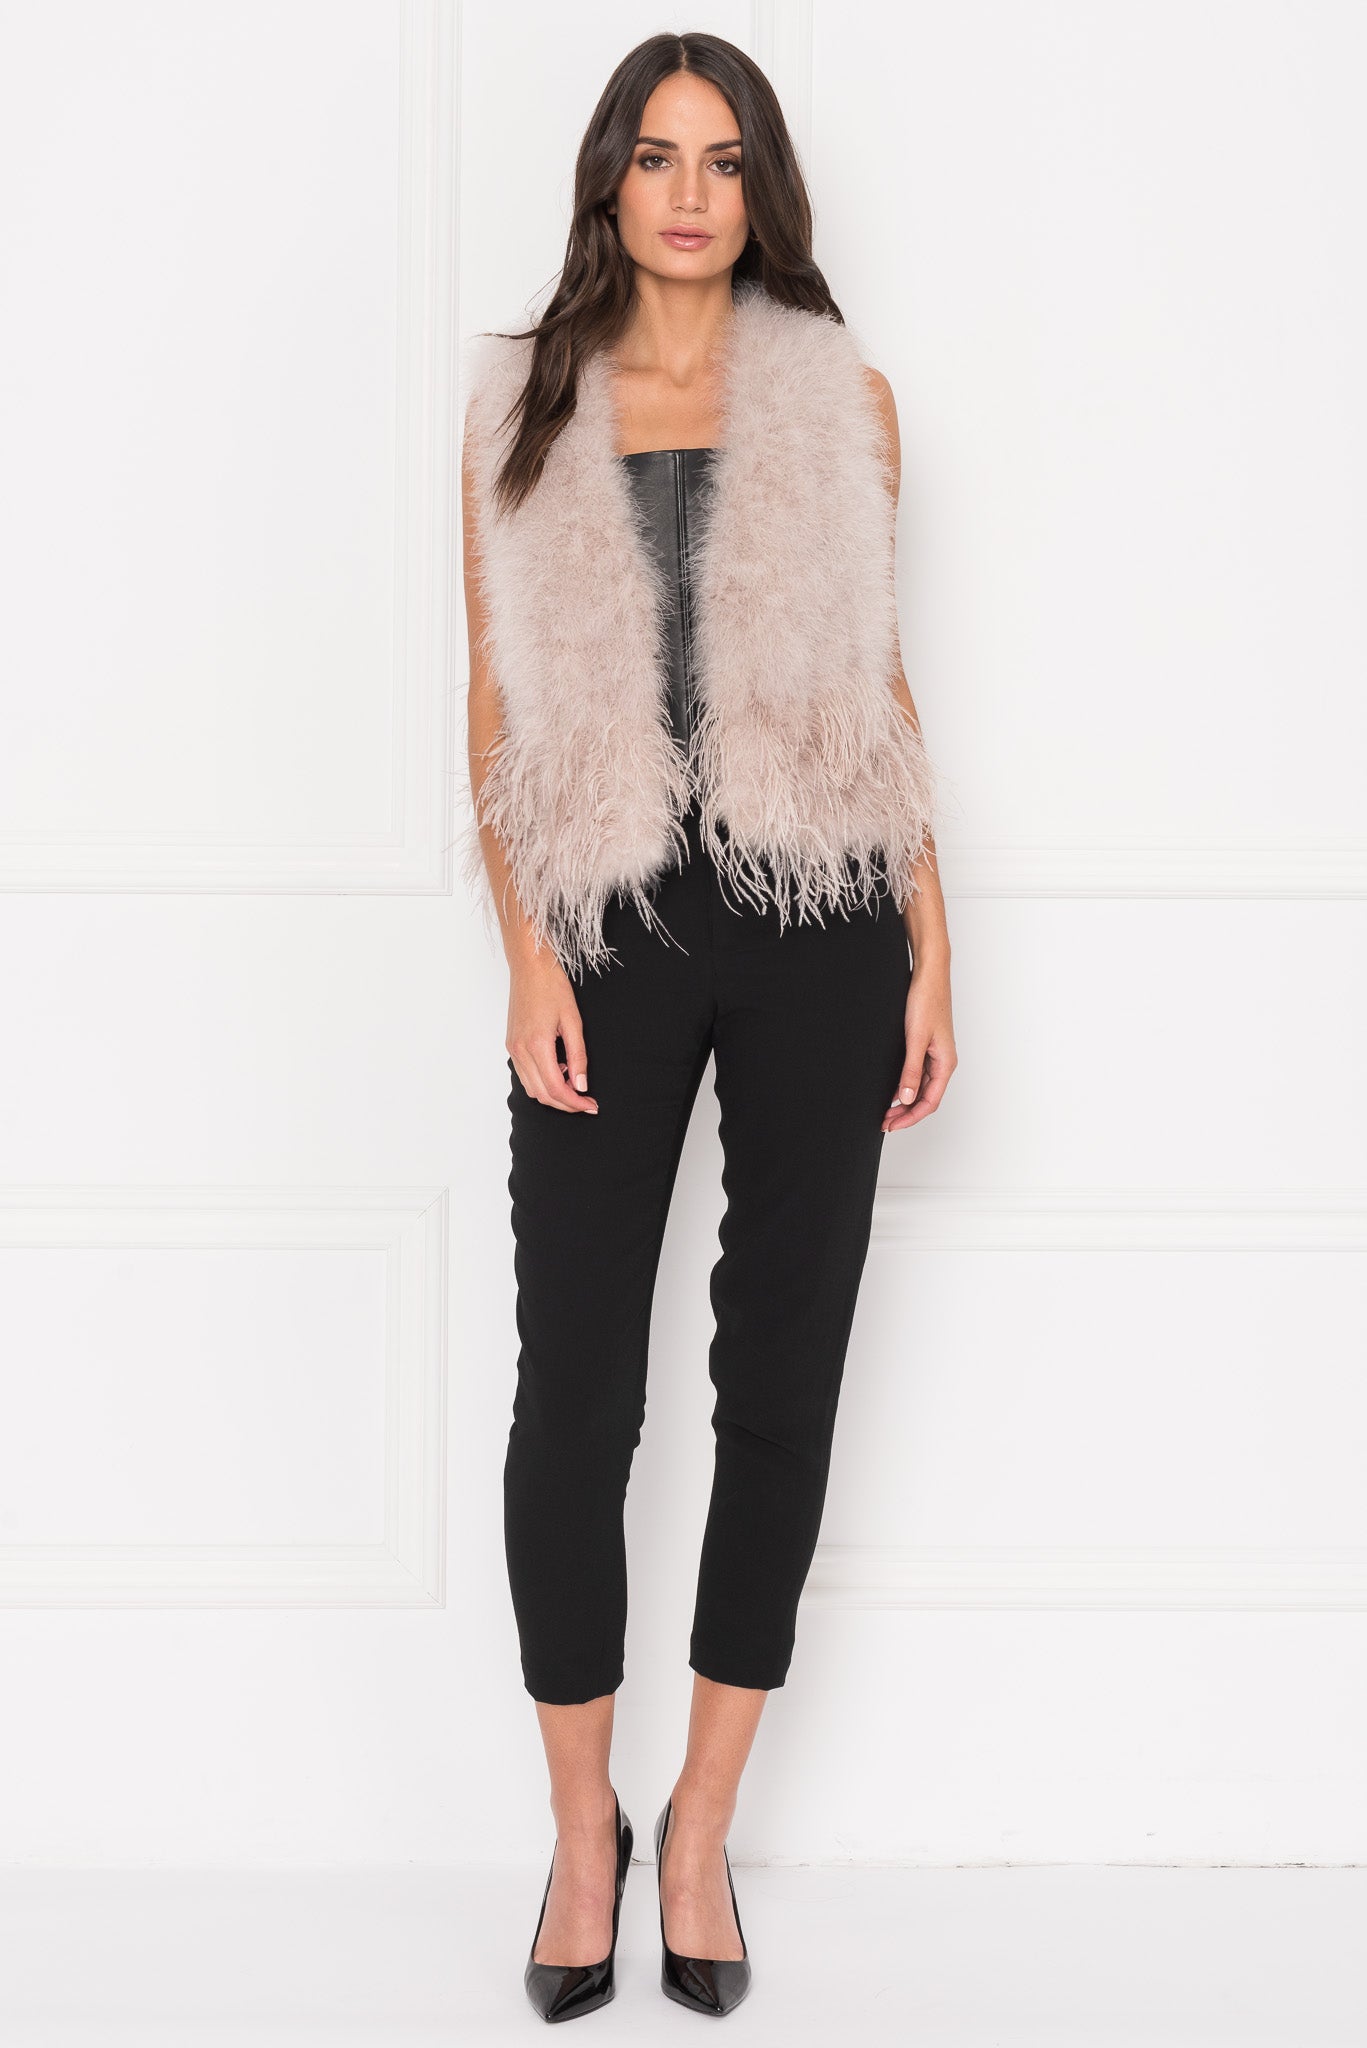  WARNA Dusty Rose  Feather Vest LAMARQUE